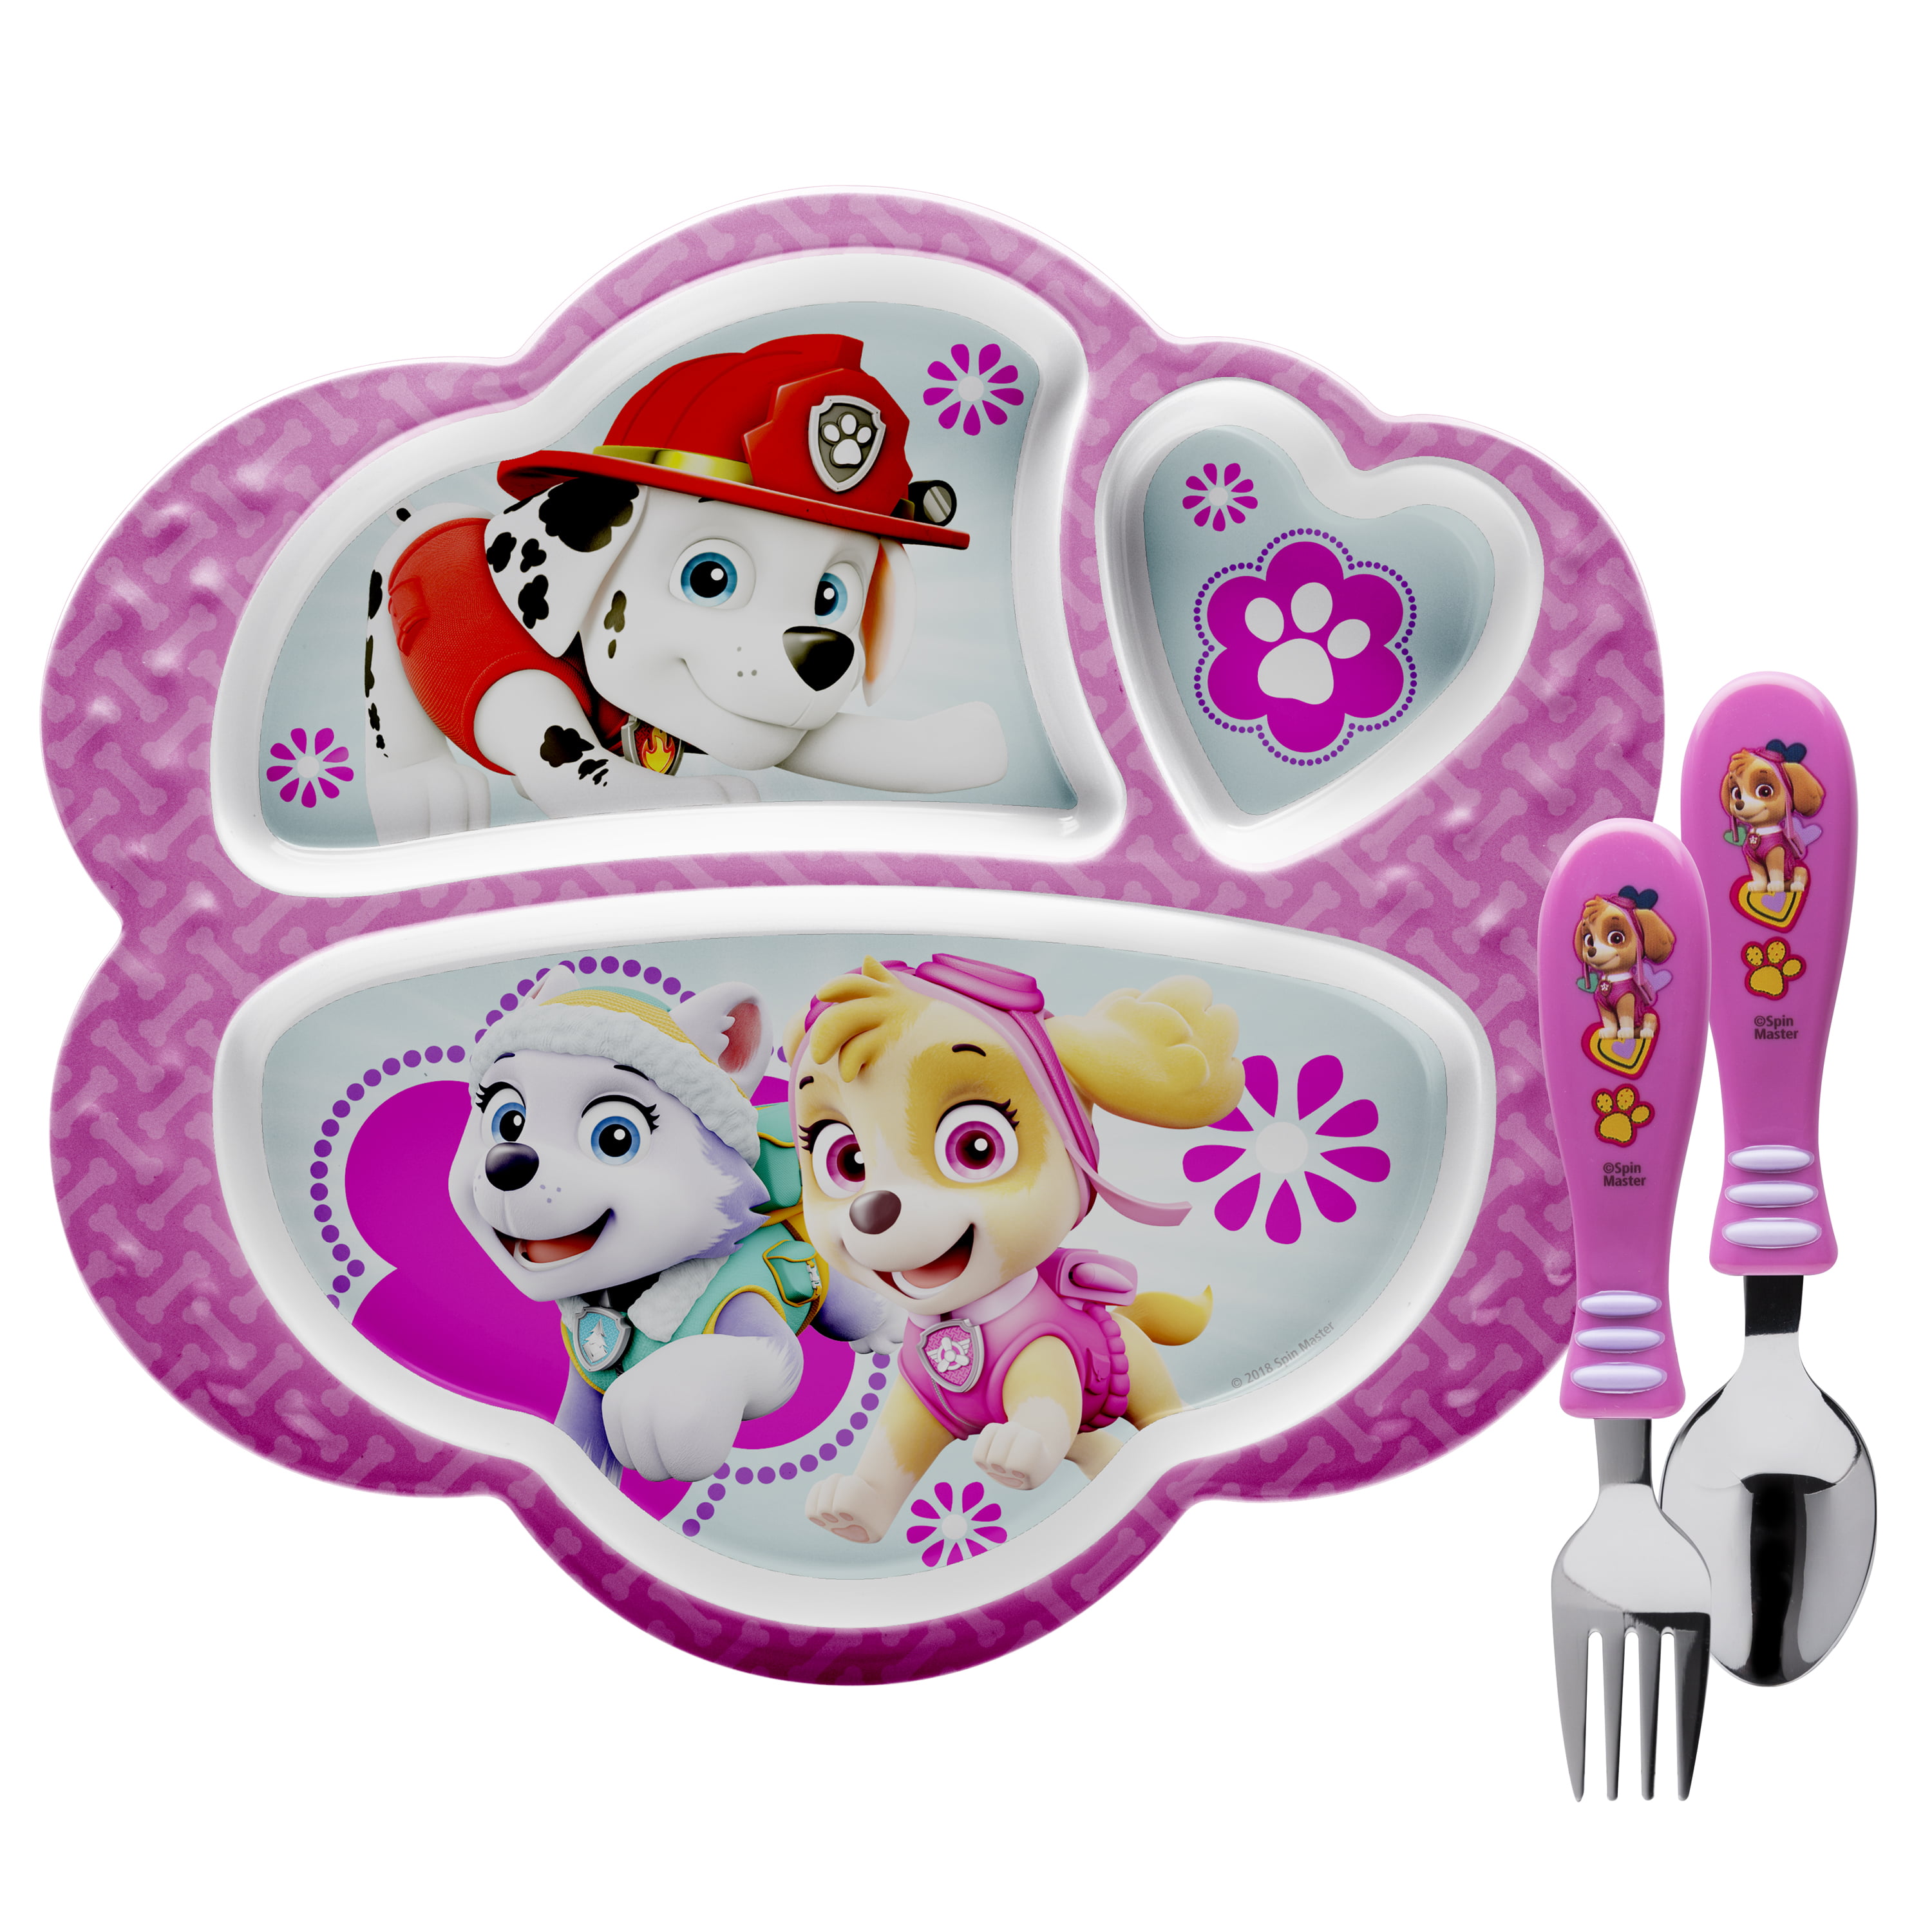 CHILDRENS TODDLER  PAW PATROL 3 PIECE DINNER BREAKFAST SET PLATE BOWL CUP HANDLE 